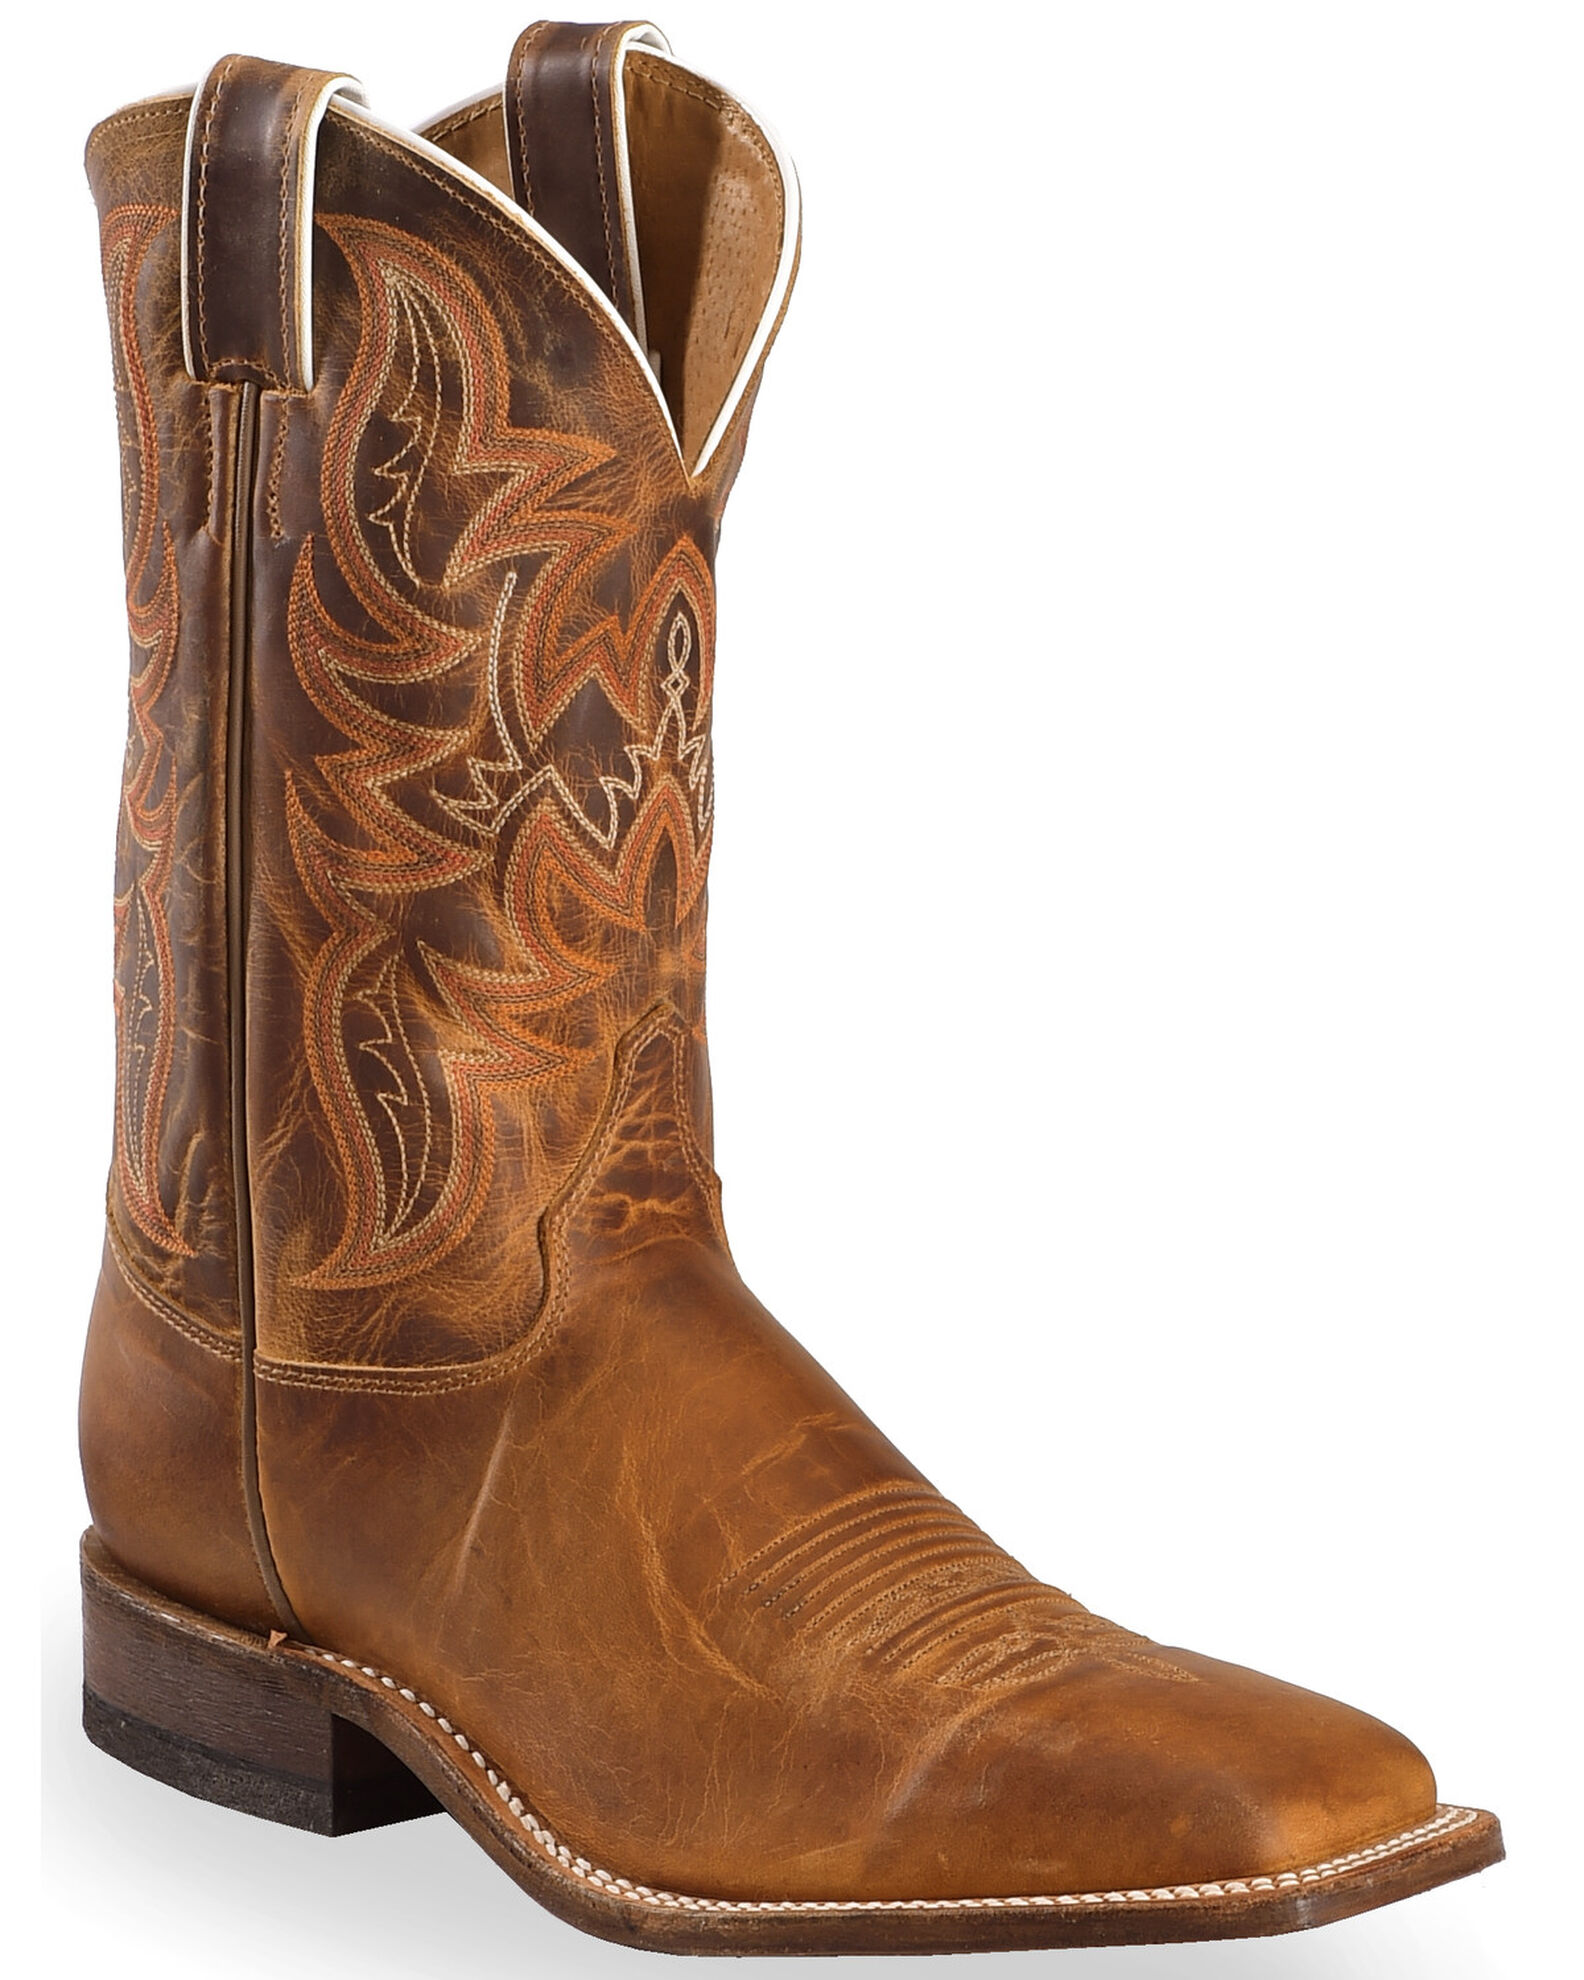 Who Sells Justin Boots Near Me?